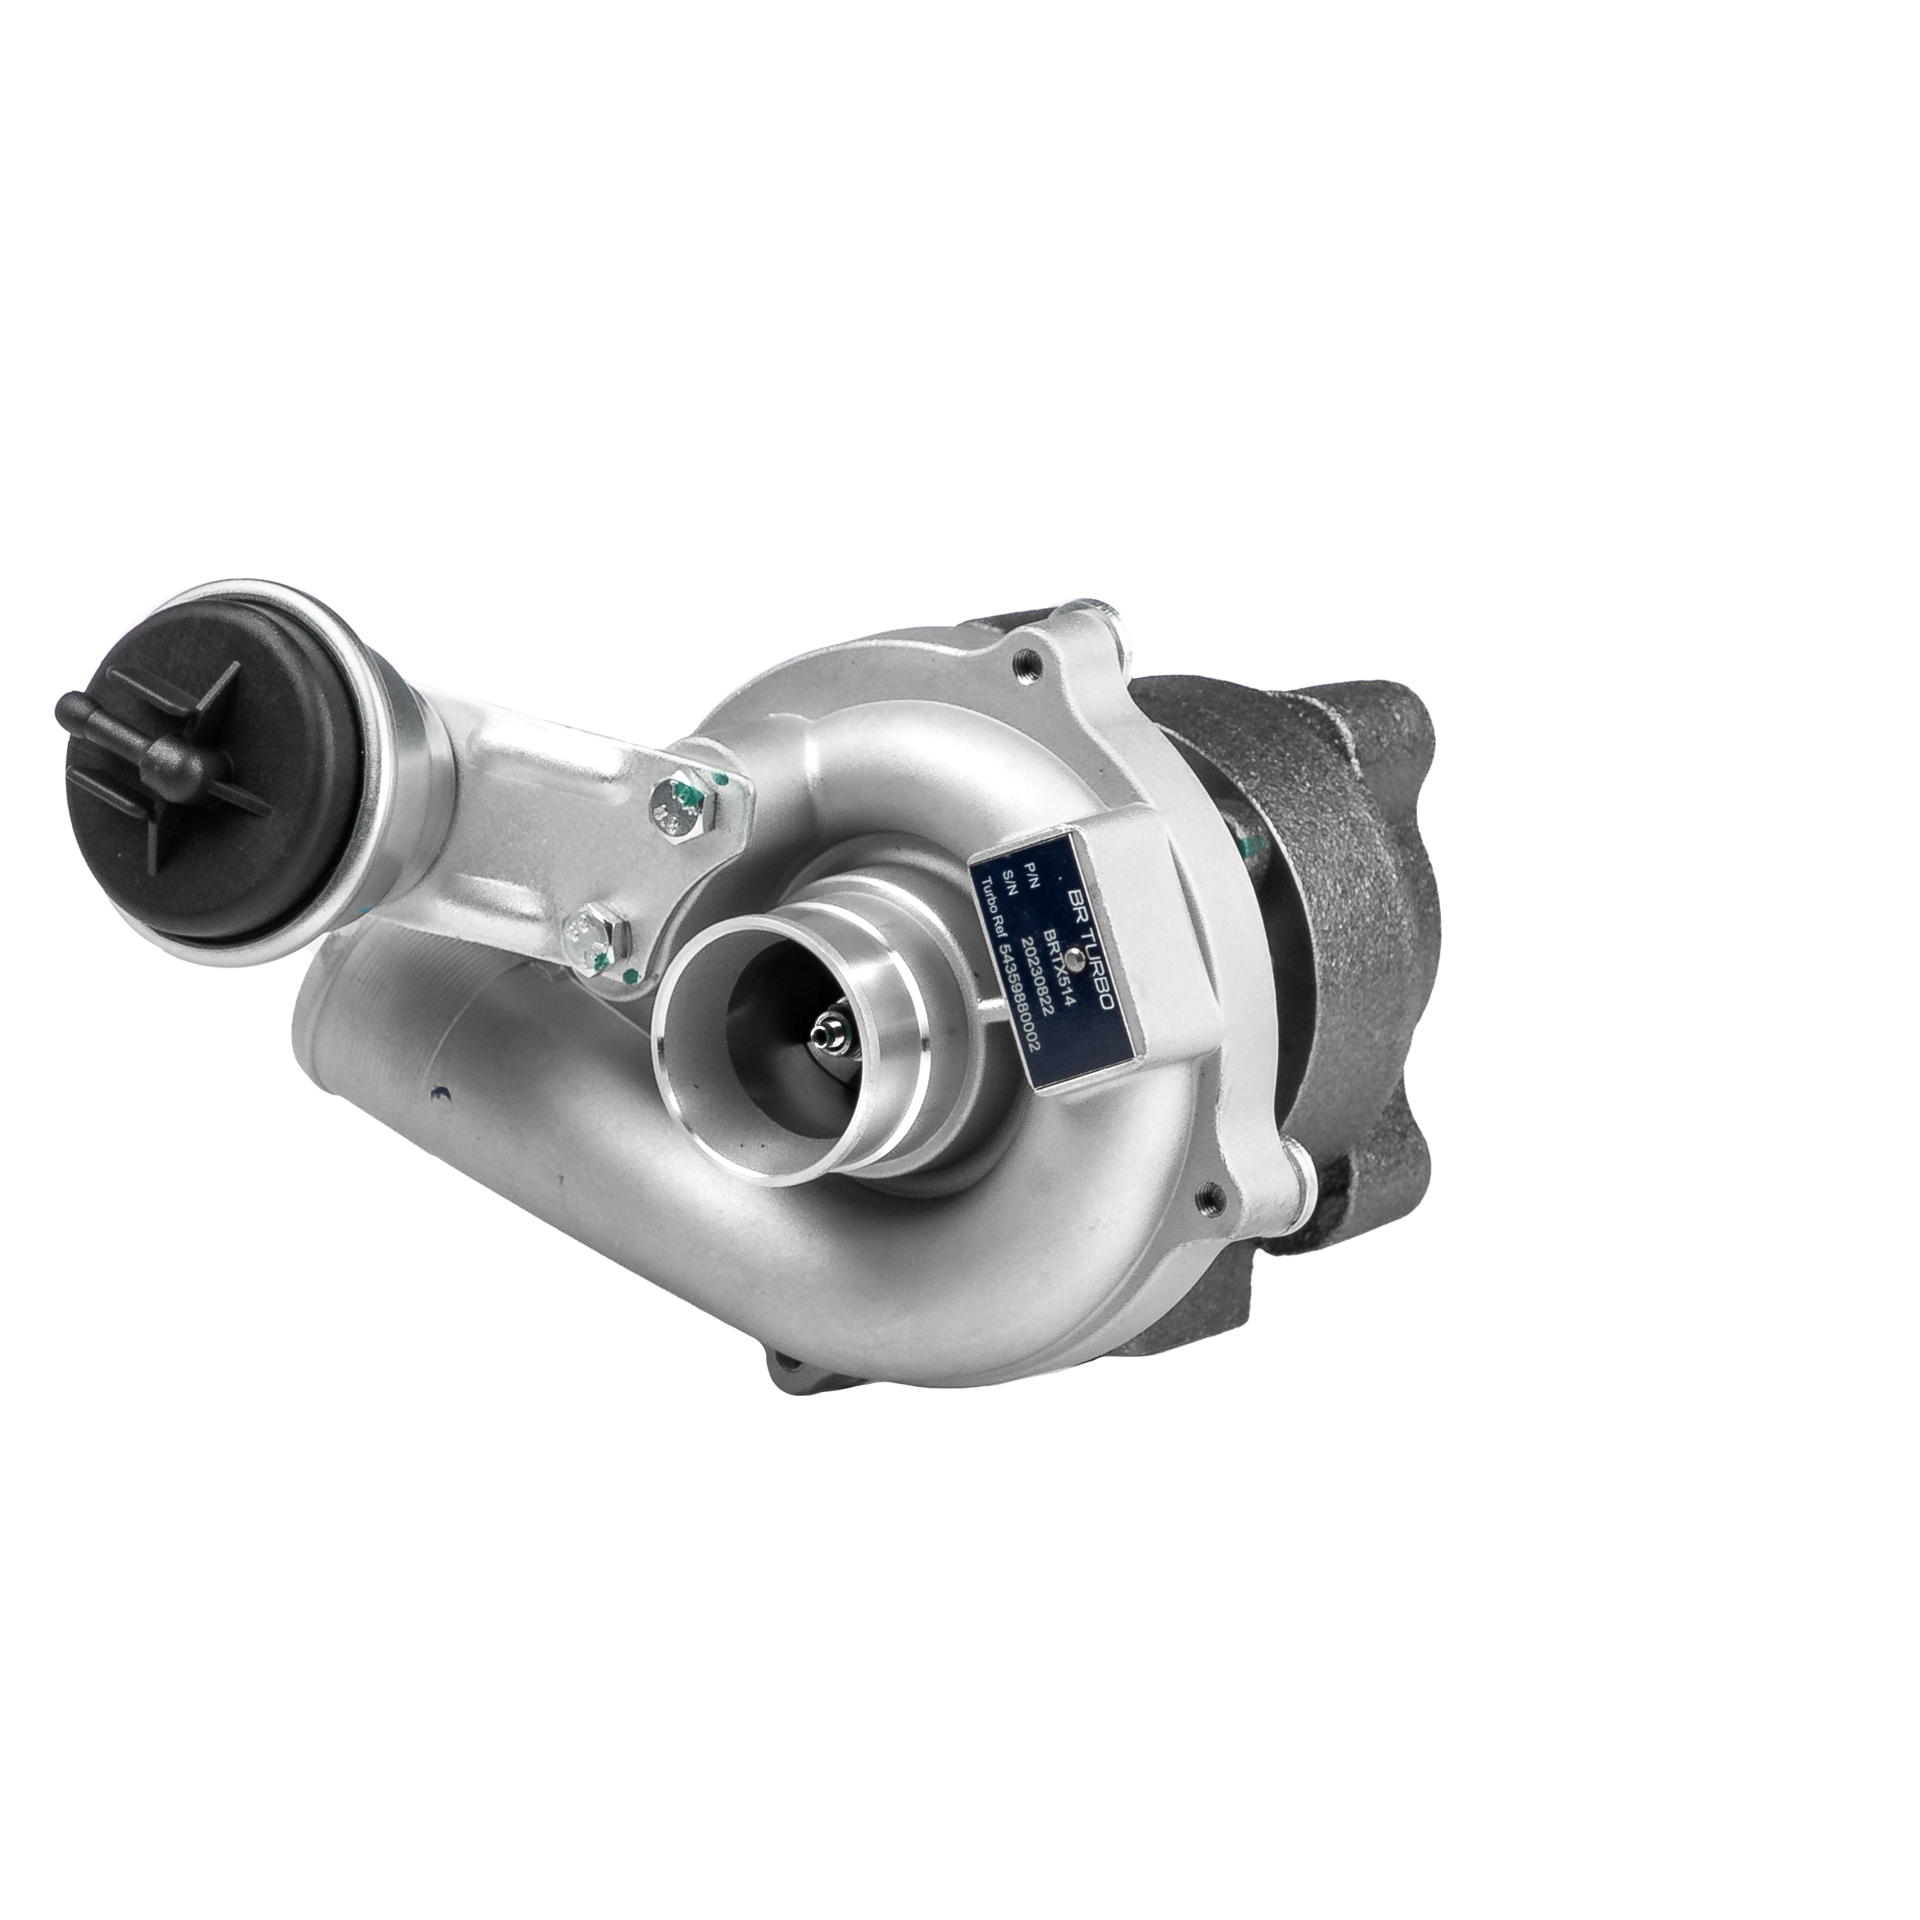 Nissan Turbocharger BR Turbo BRTX514 at a good price